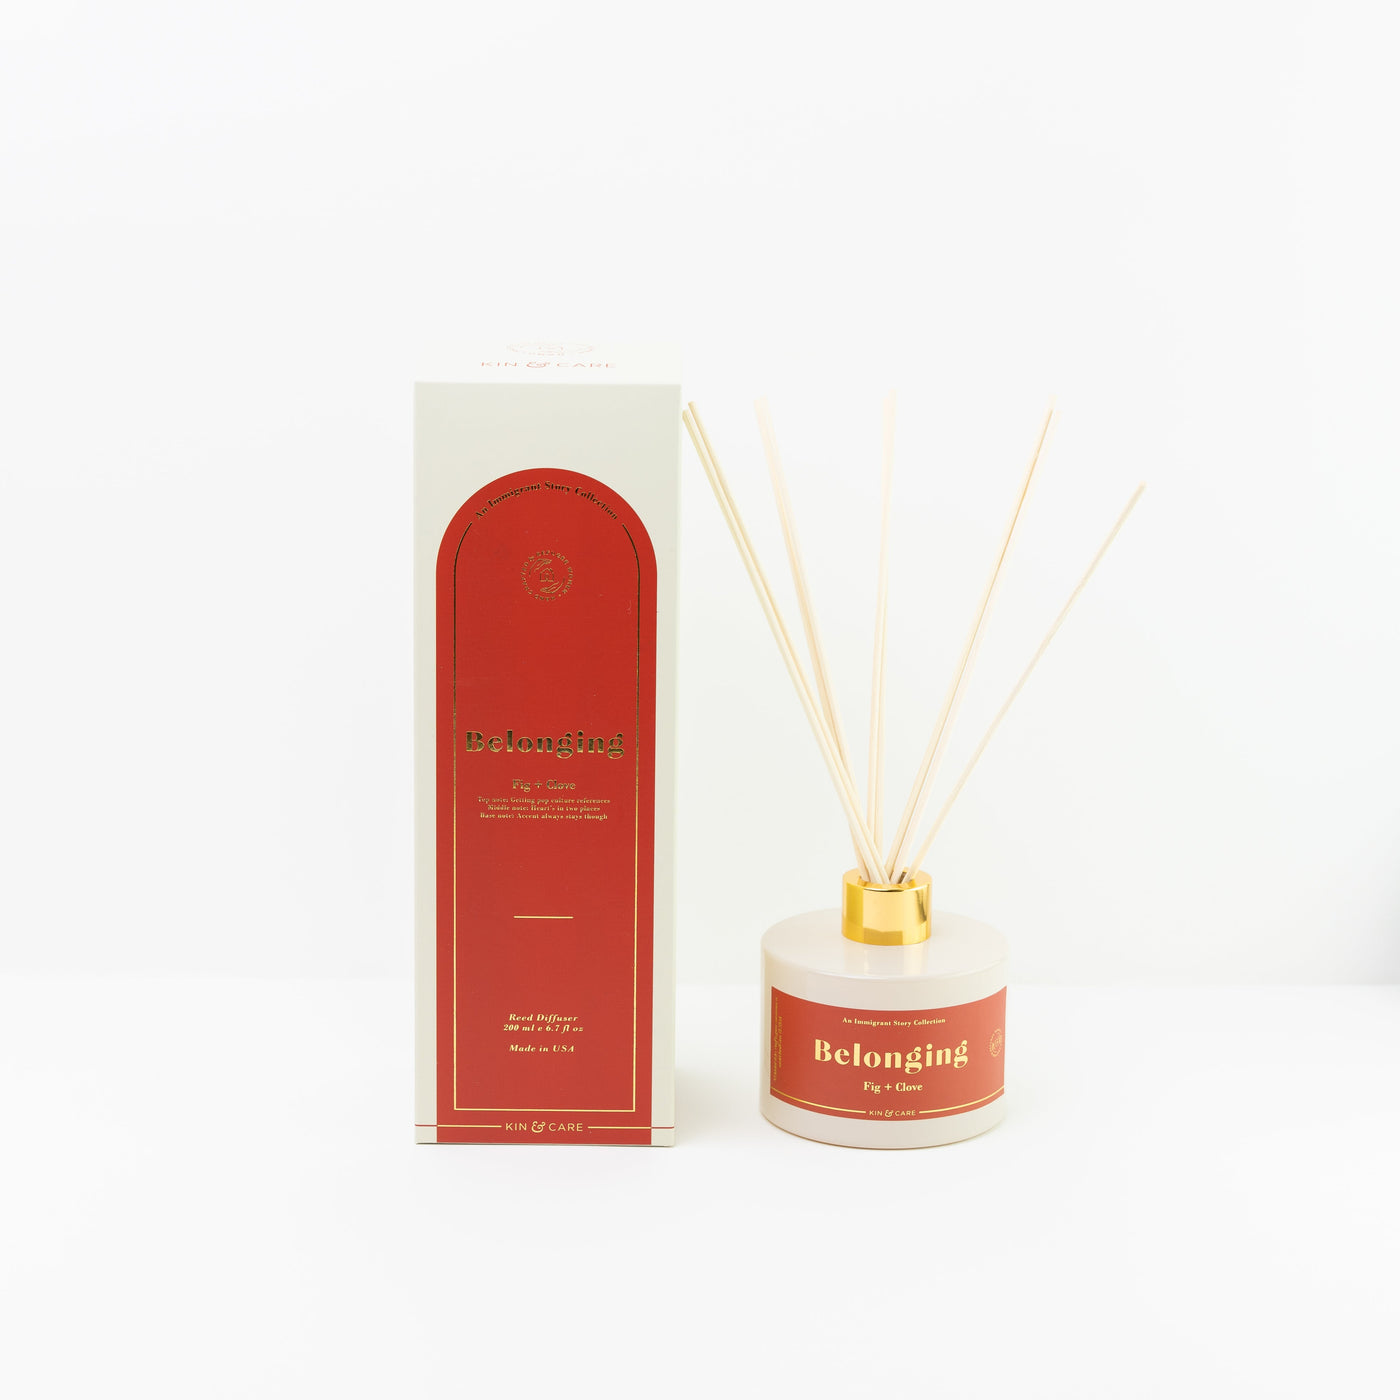 An Immigrant Story - Reed Diffusers